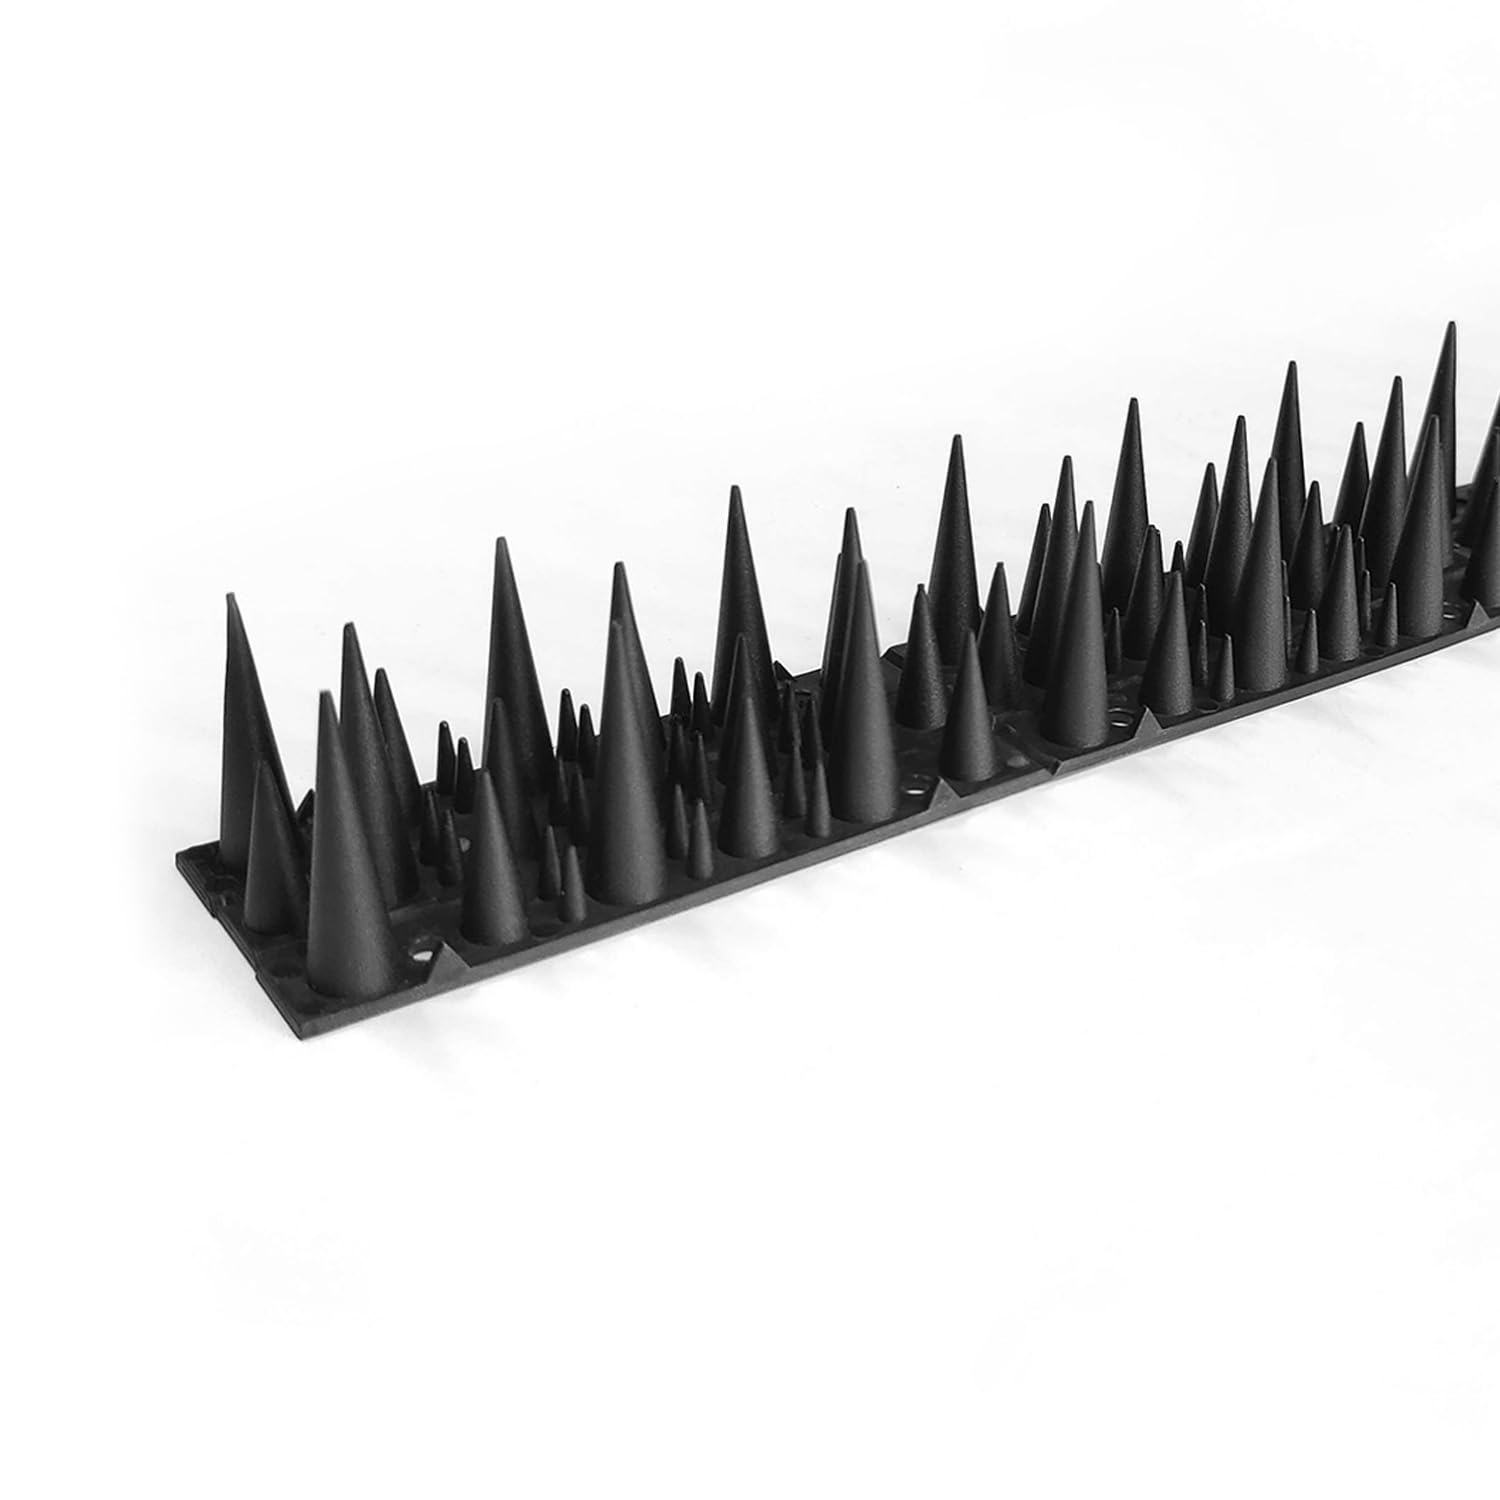 BUGG OFF - Bird & Rodent Spikes, Unique Spike Pattern effecitviely deteres Pesky Pigeons, Squirrels, Raccoons. Installs on Fences, Gates, Roofs, Walls and More! (15 Feet, Black Plastic)